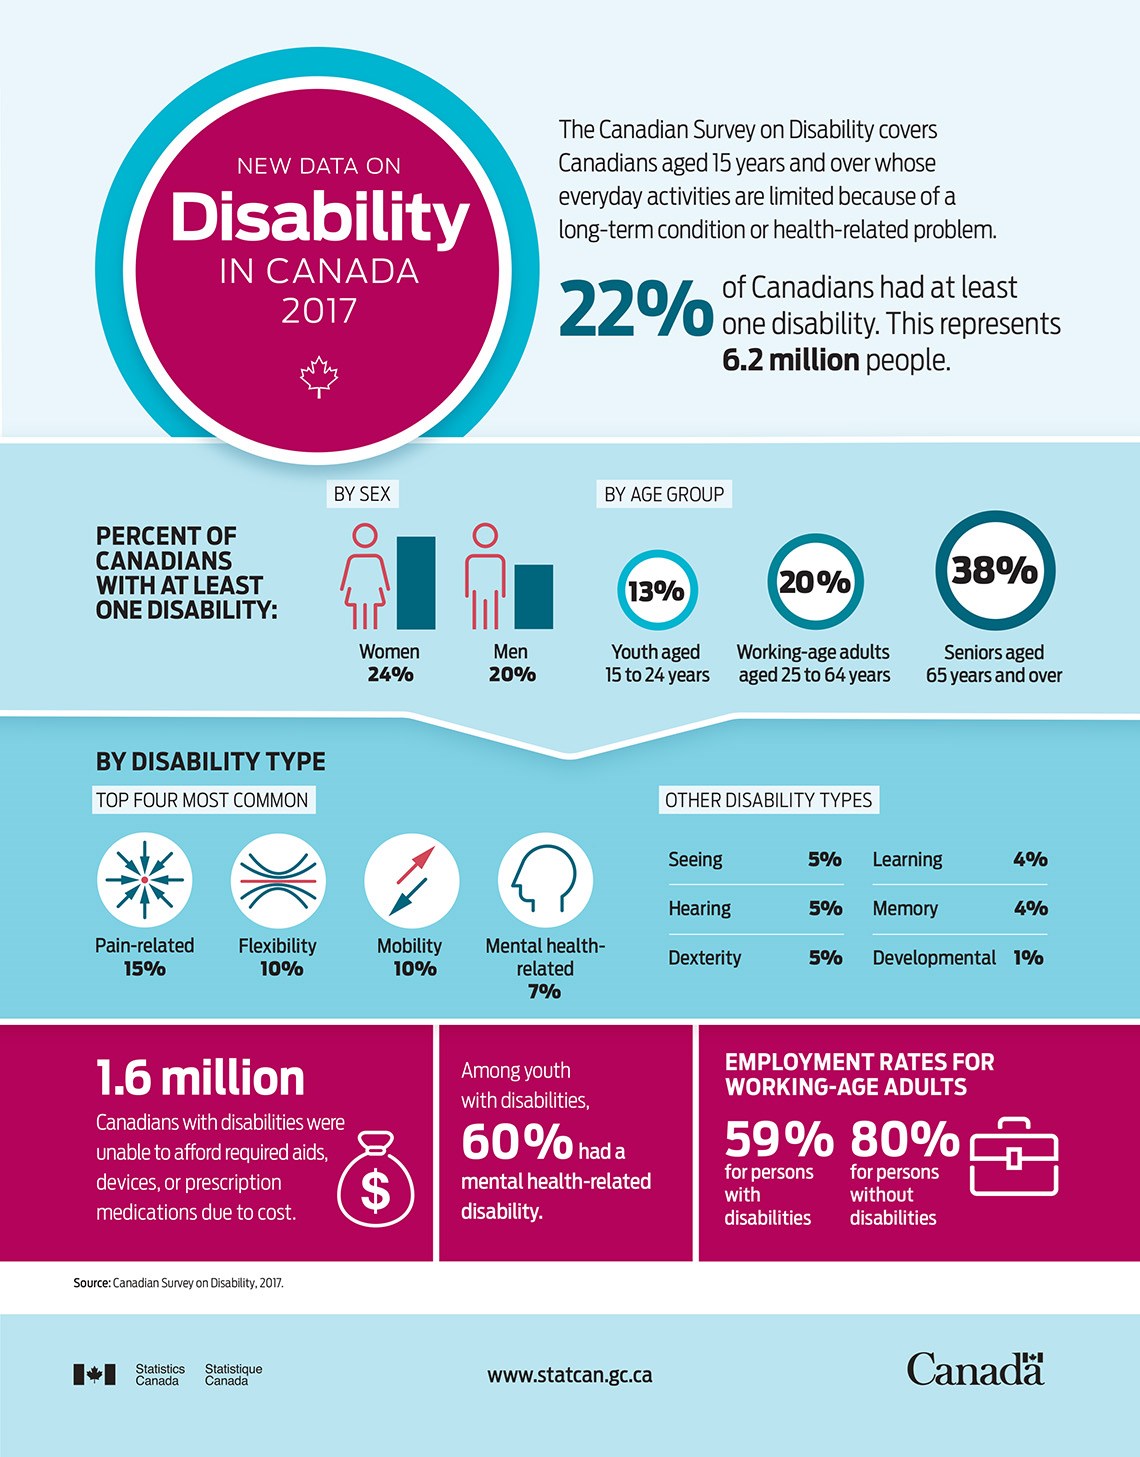 Infographic titled New Data on Disability in Canada 2017. Link to description follows.